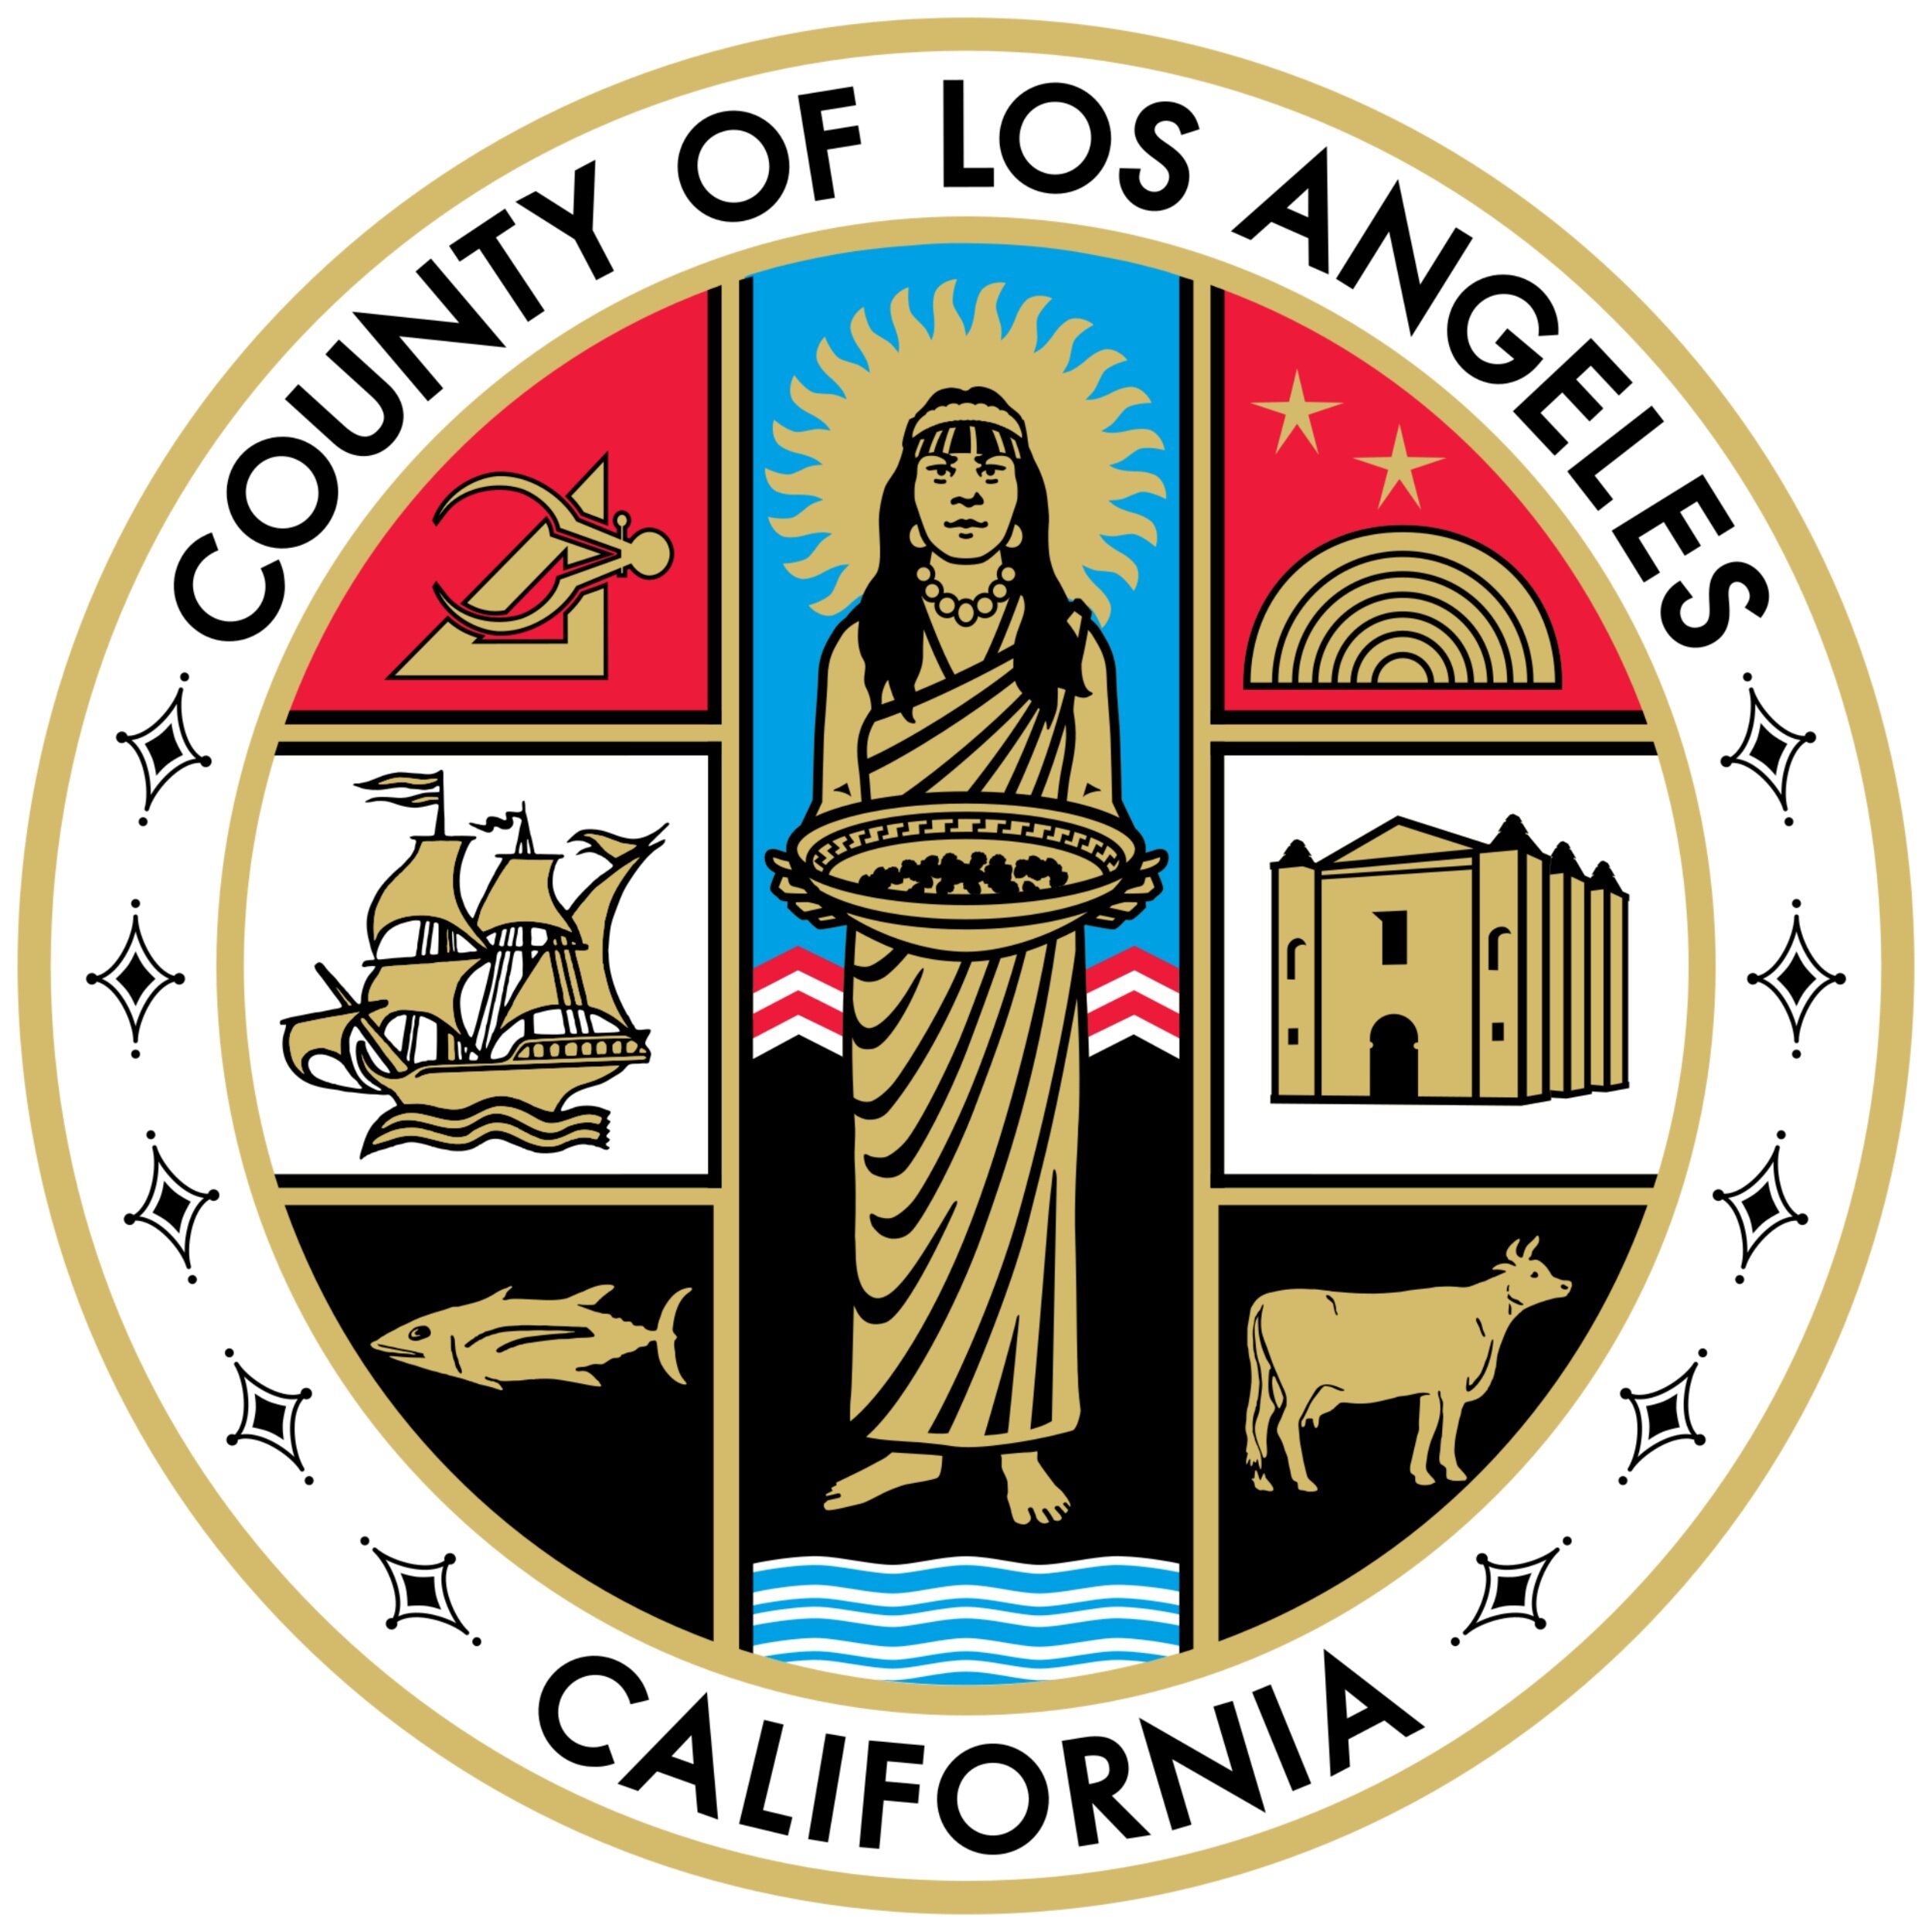 2560px-Seal_of_Los_Angeles_County%2C_California.svg.jpg